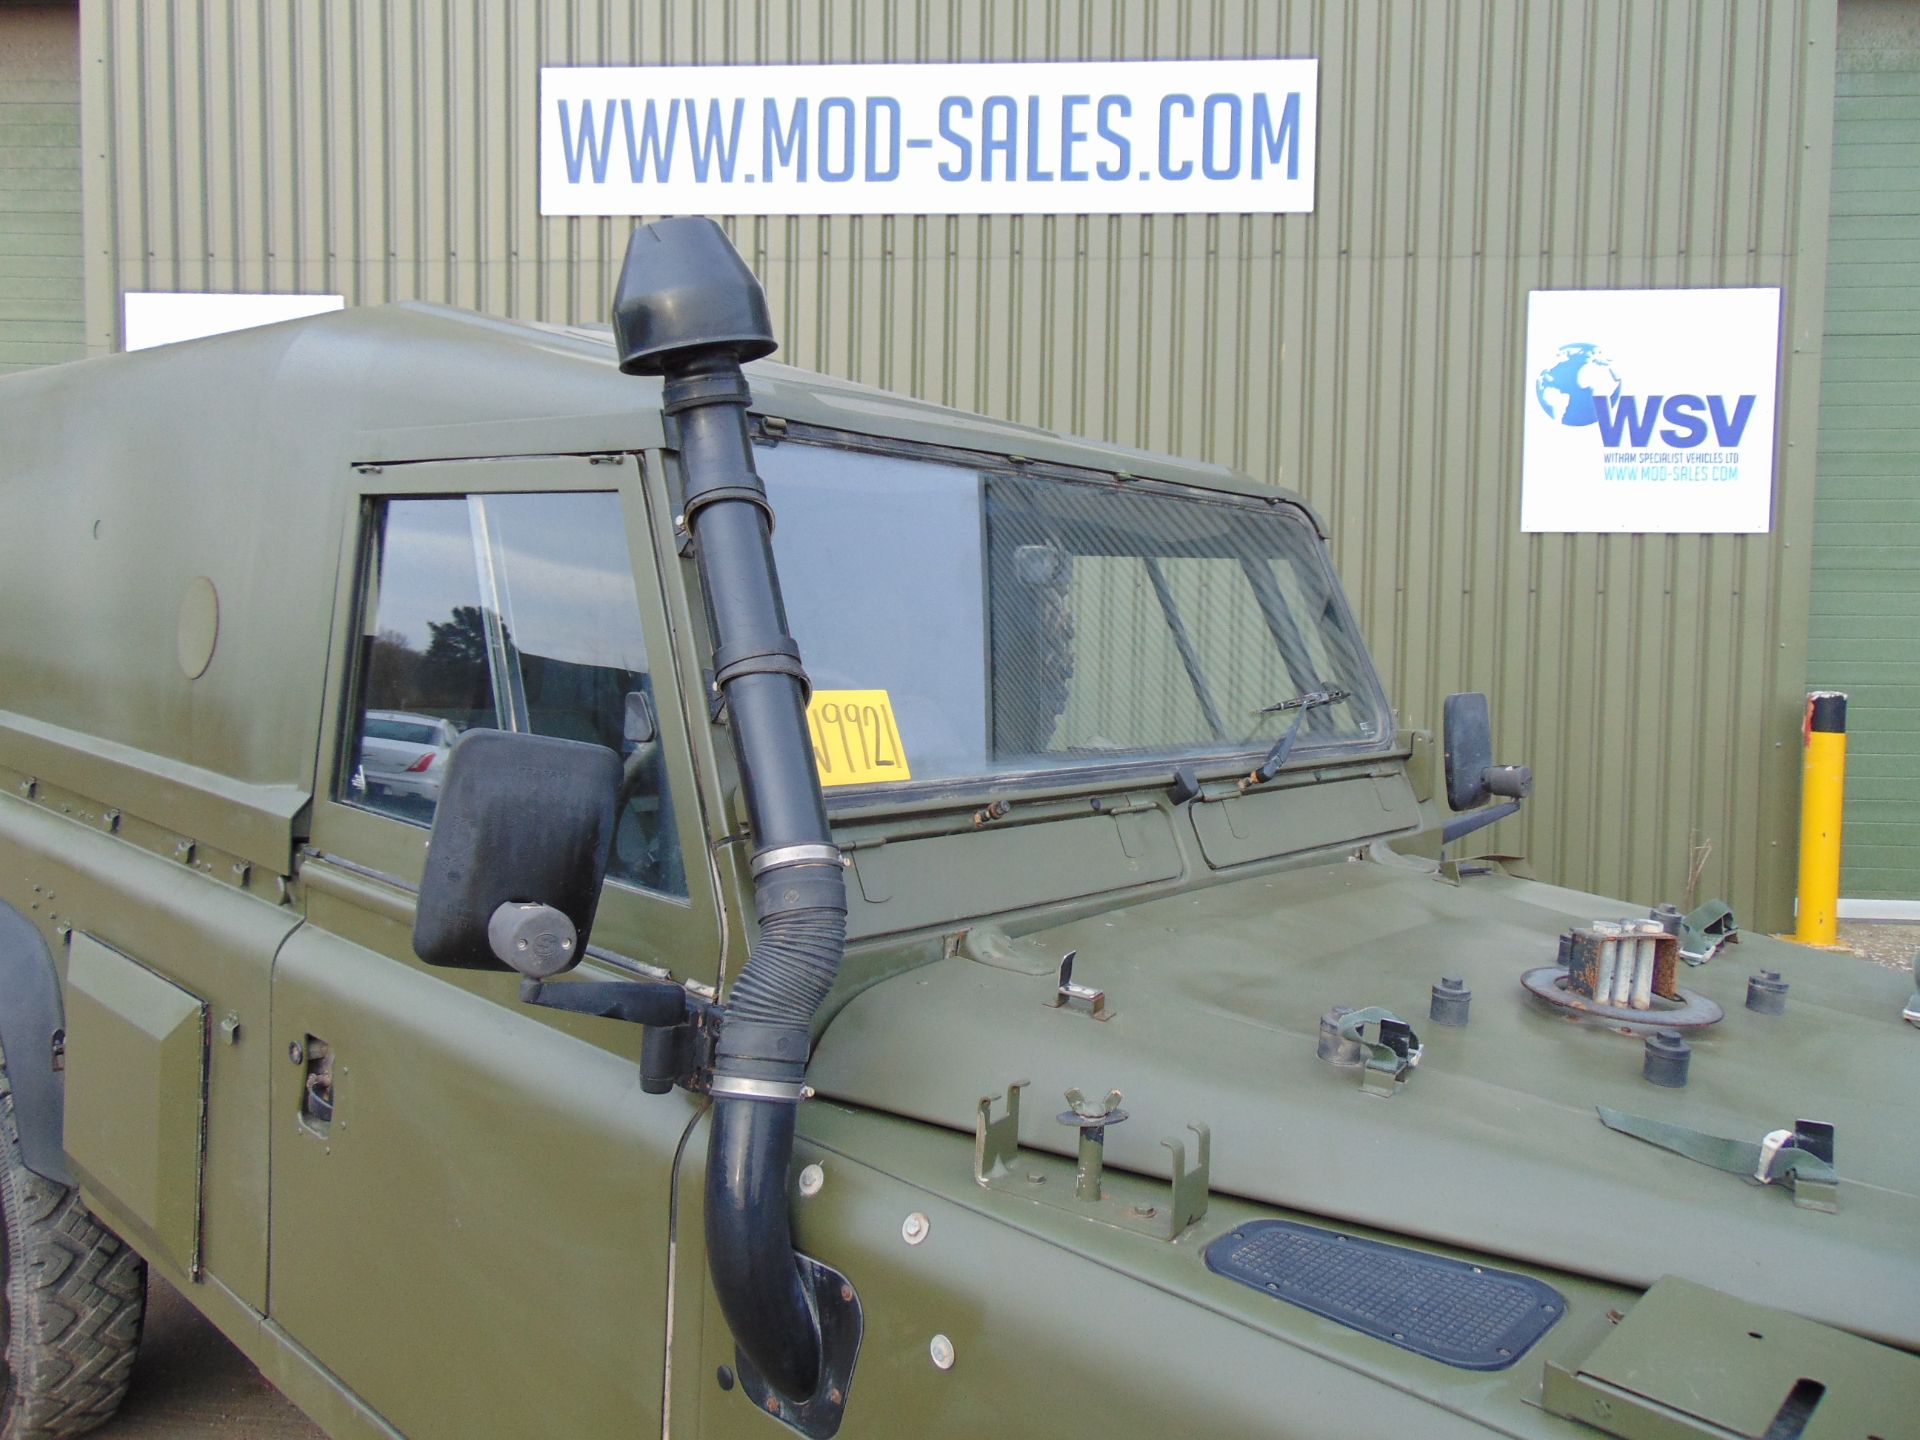 Land Rover Wolf 110 Hard Top - Image 14 of 25